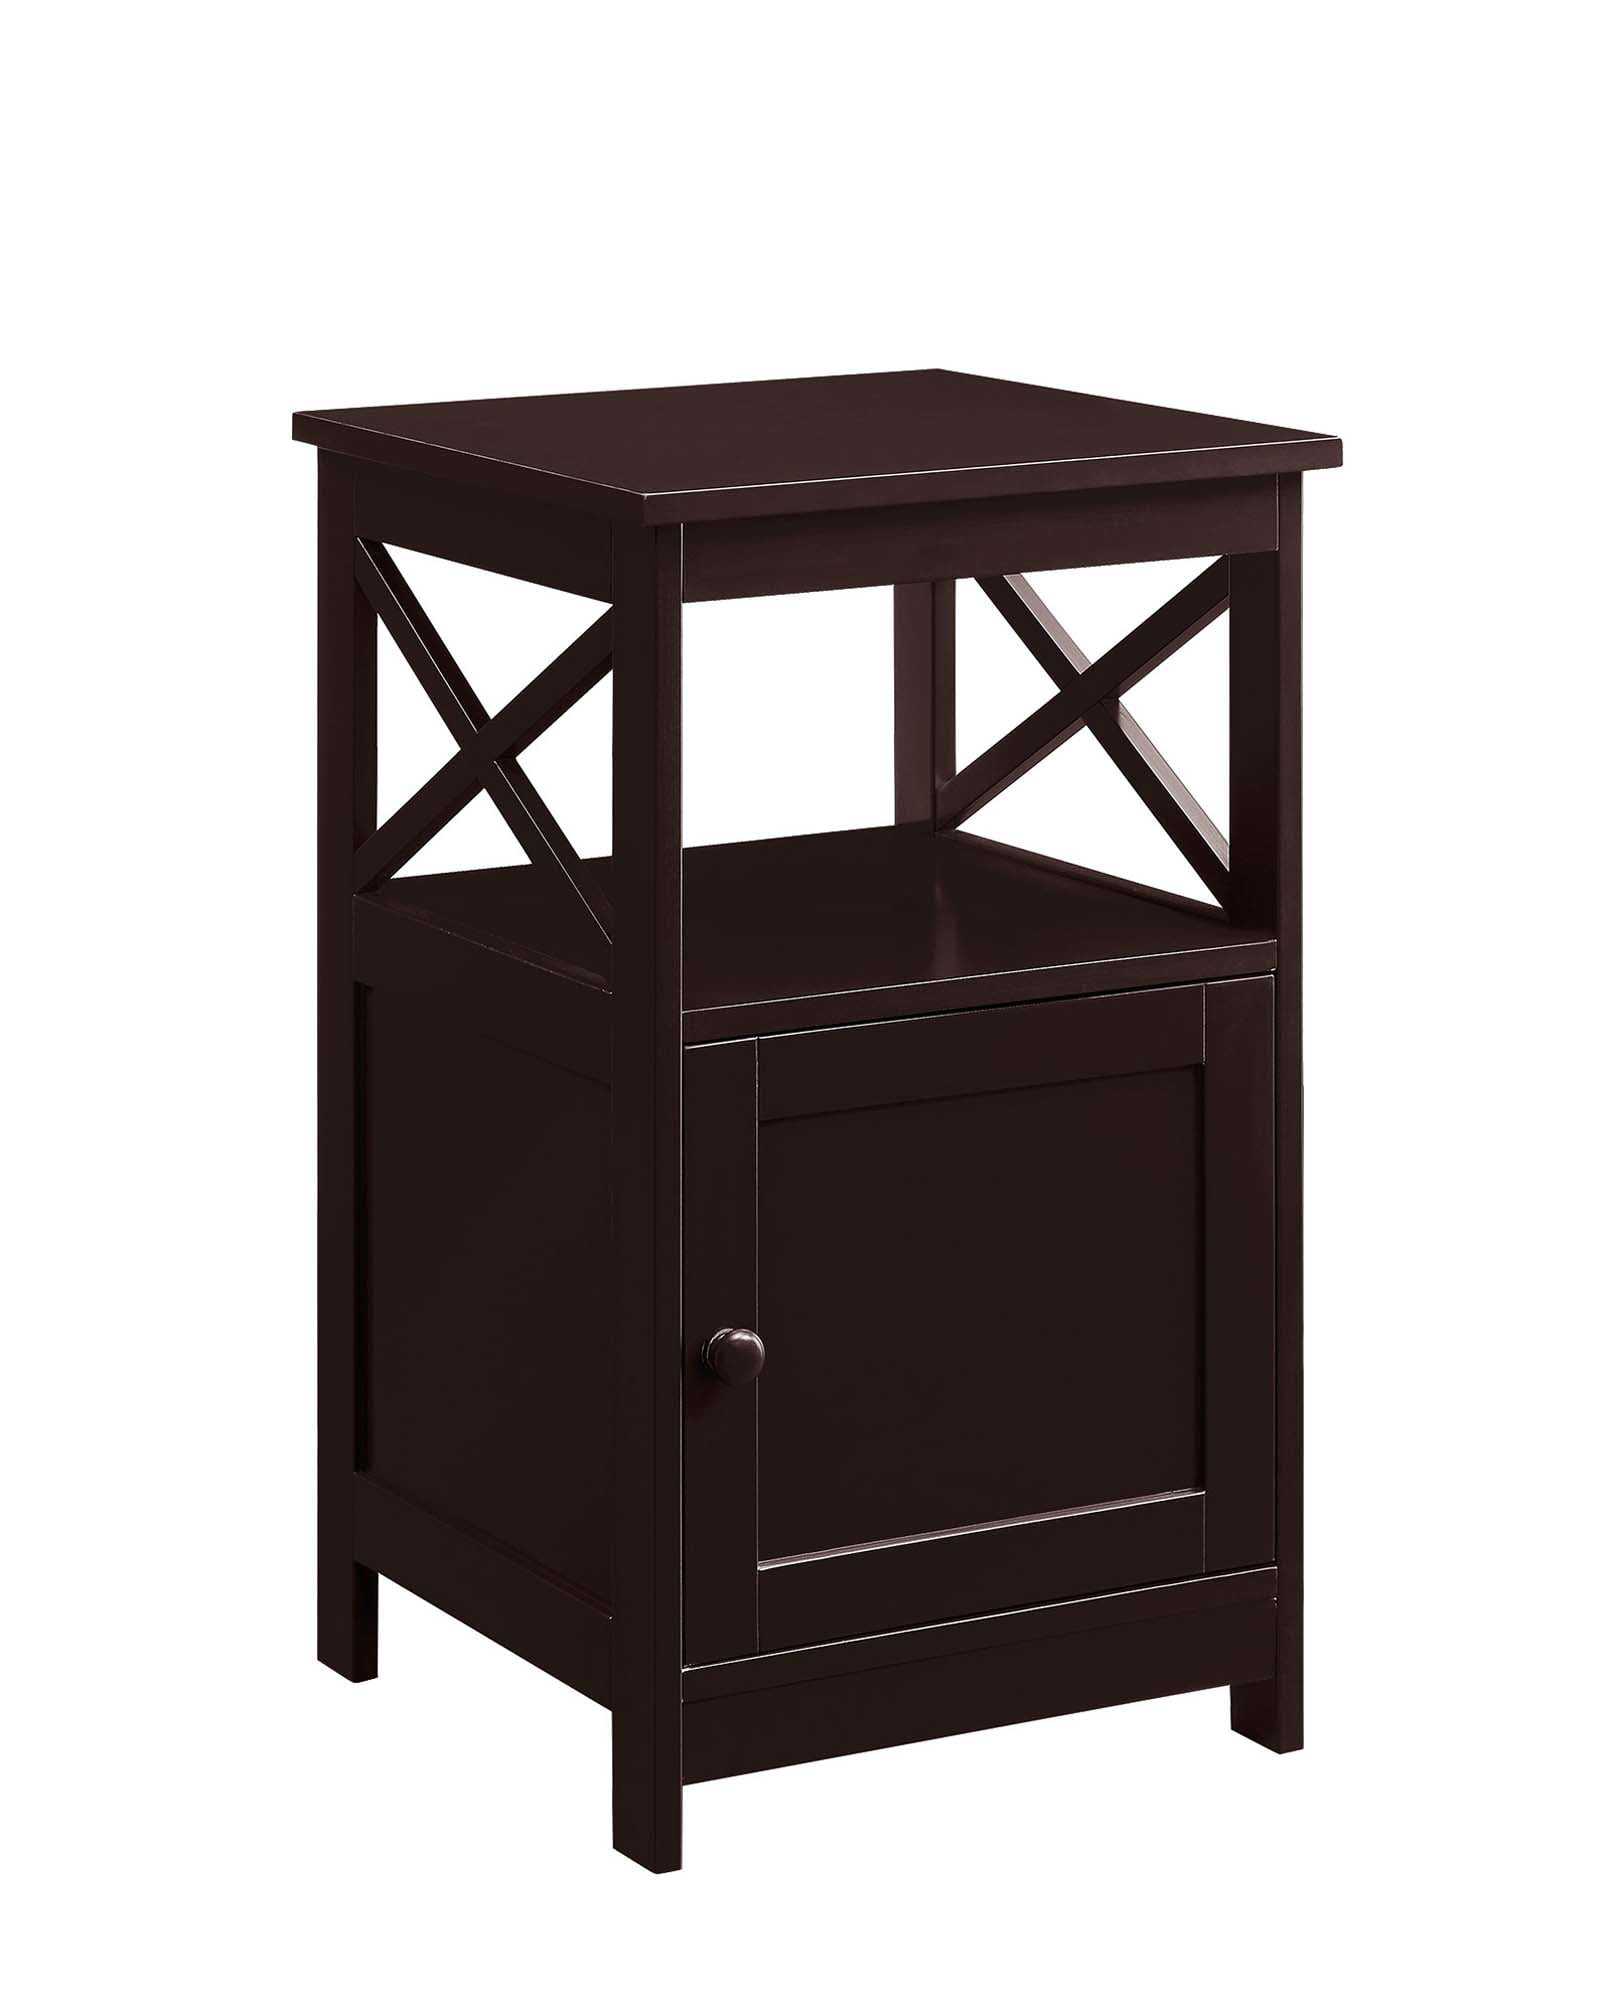 Convenience Concepts Oxford End Table with Cabinet - Walmart.com